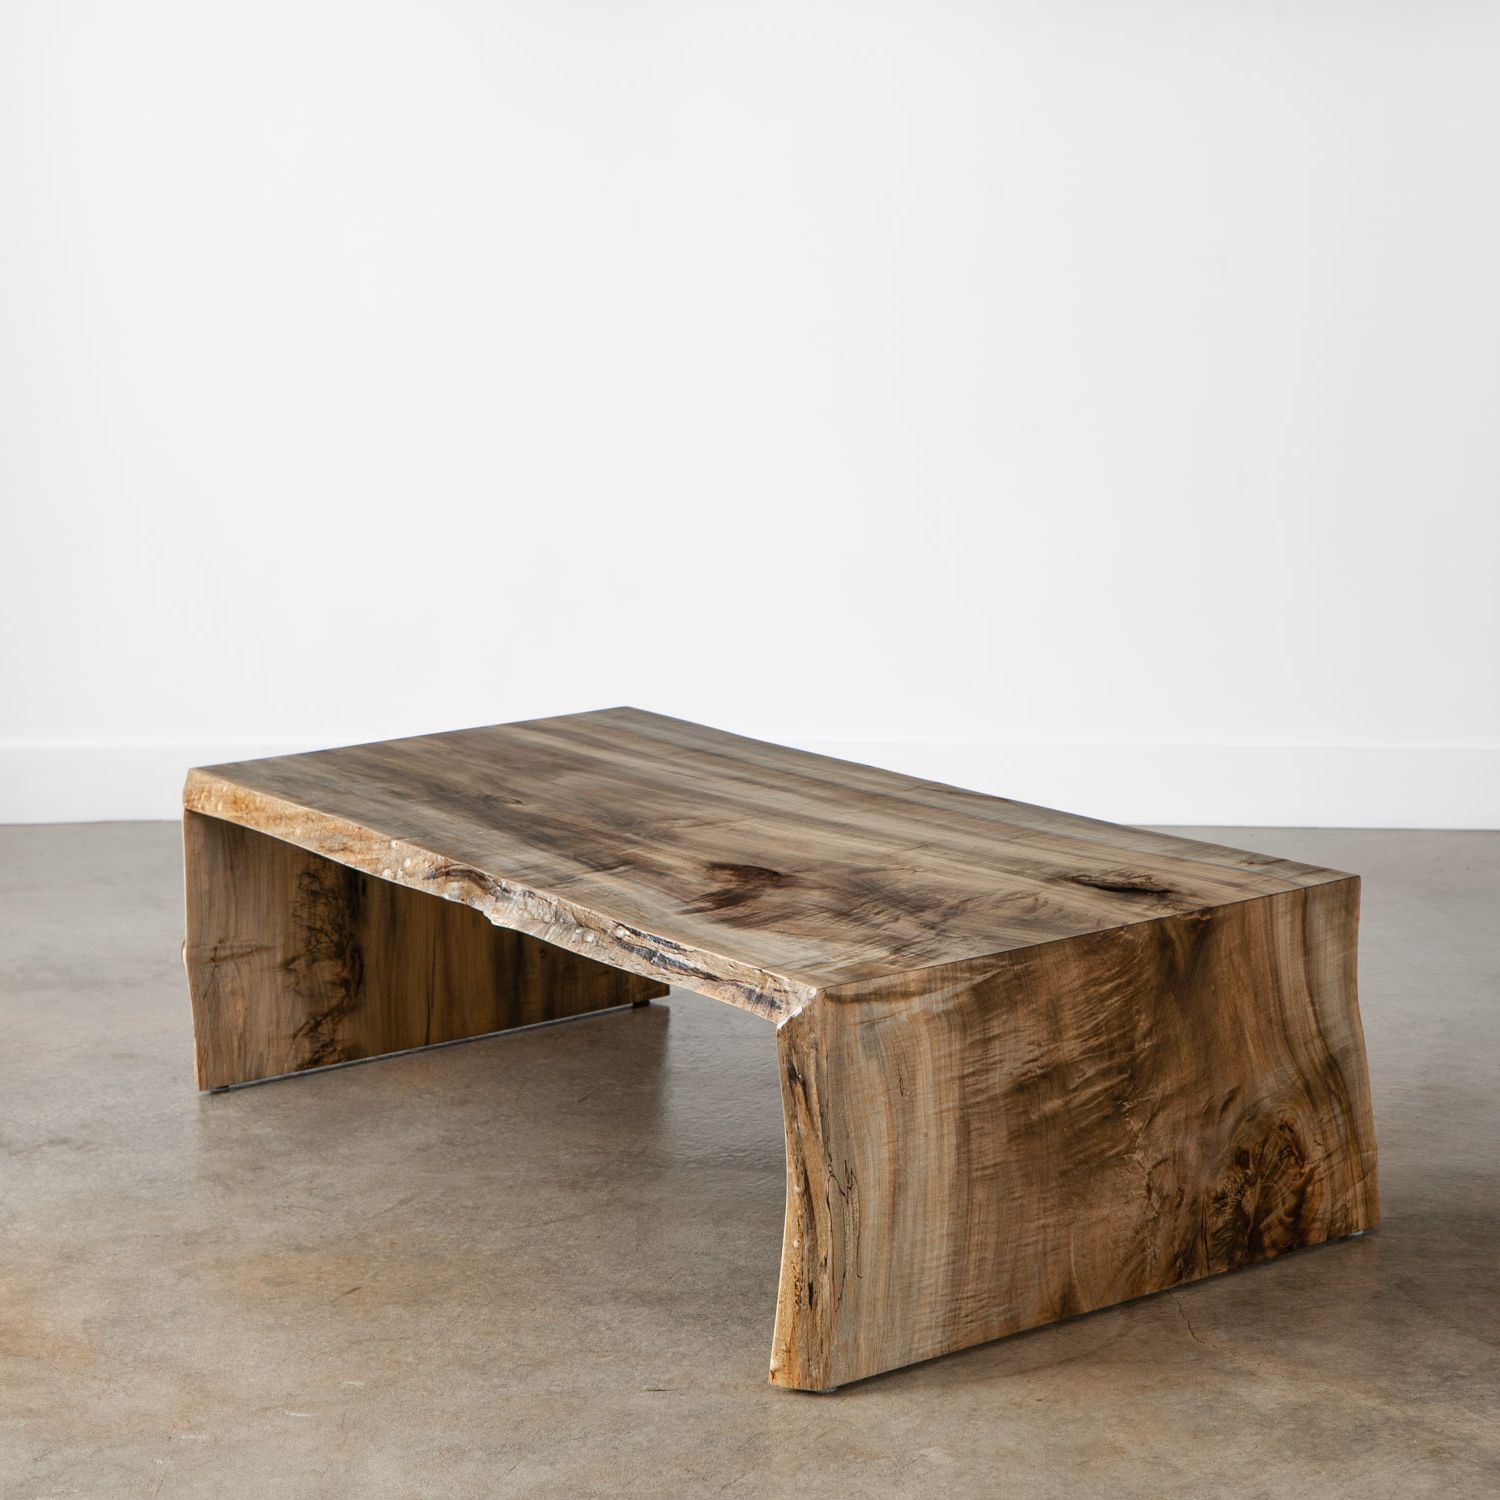 Most Popular Oxidized Maple Coffee Table No (View 2 of 10)